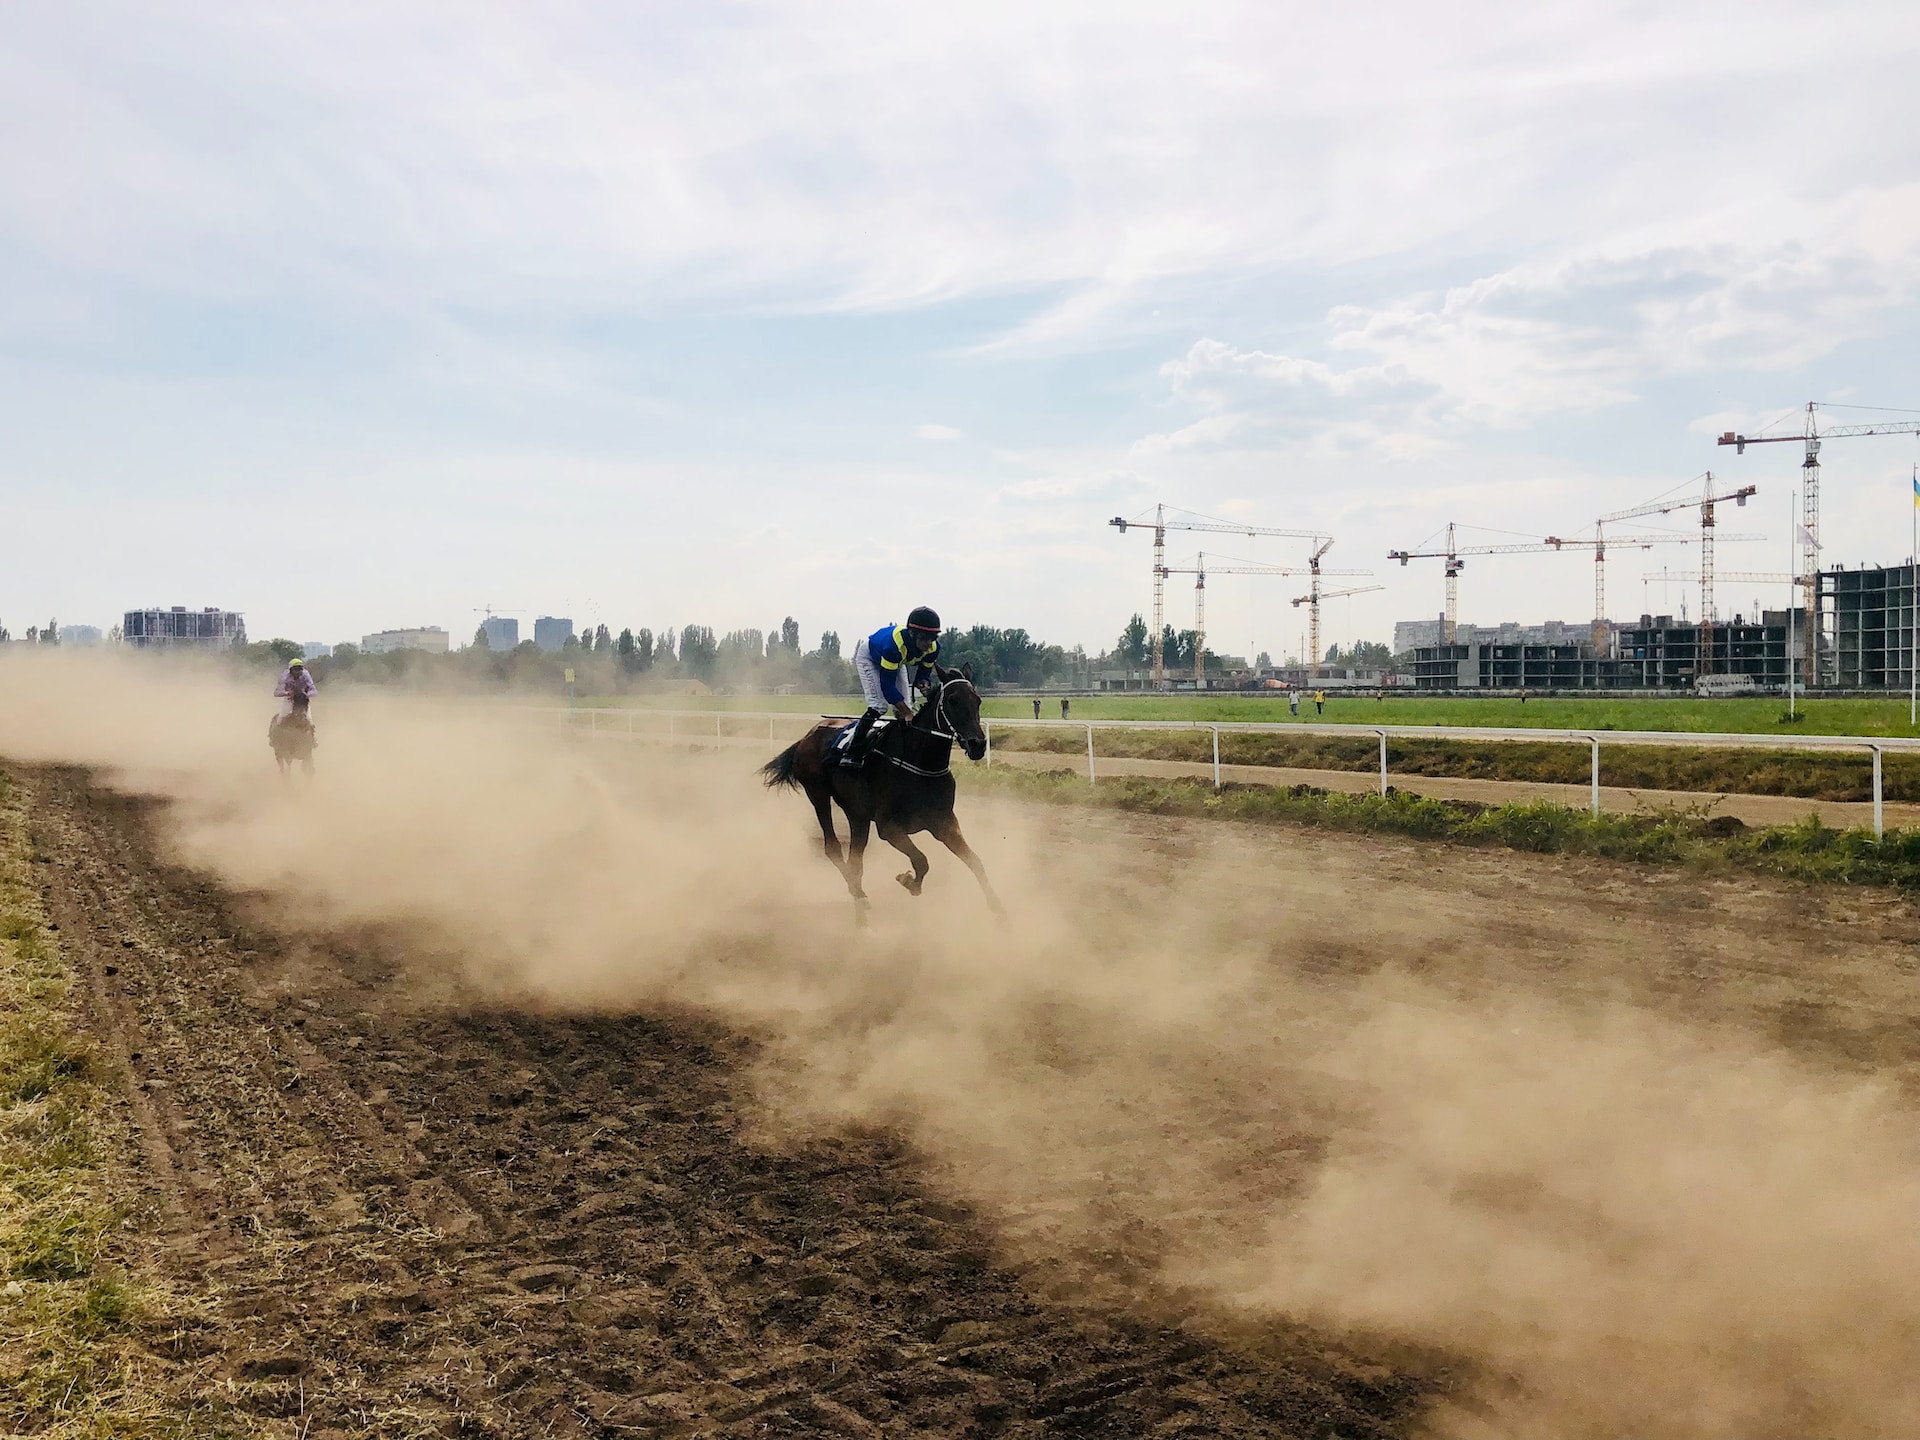 Two horses with riders are running on a muddy track.